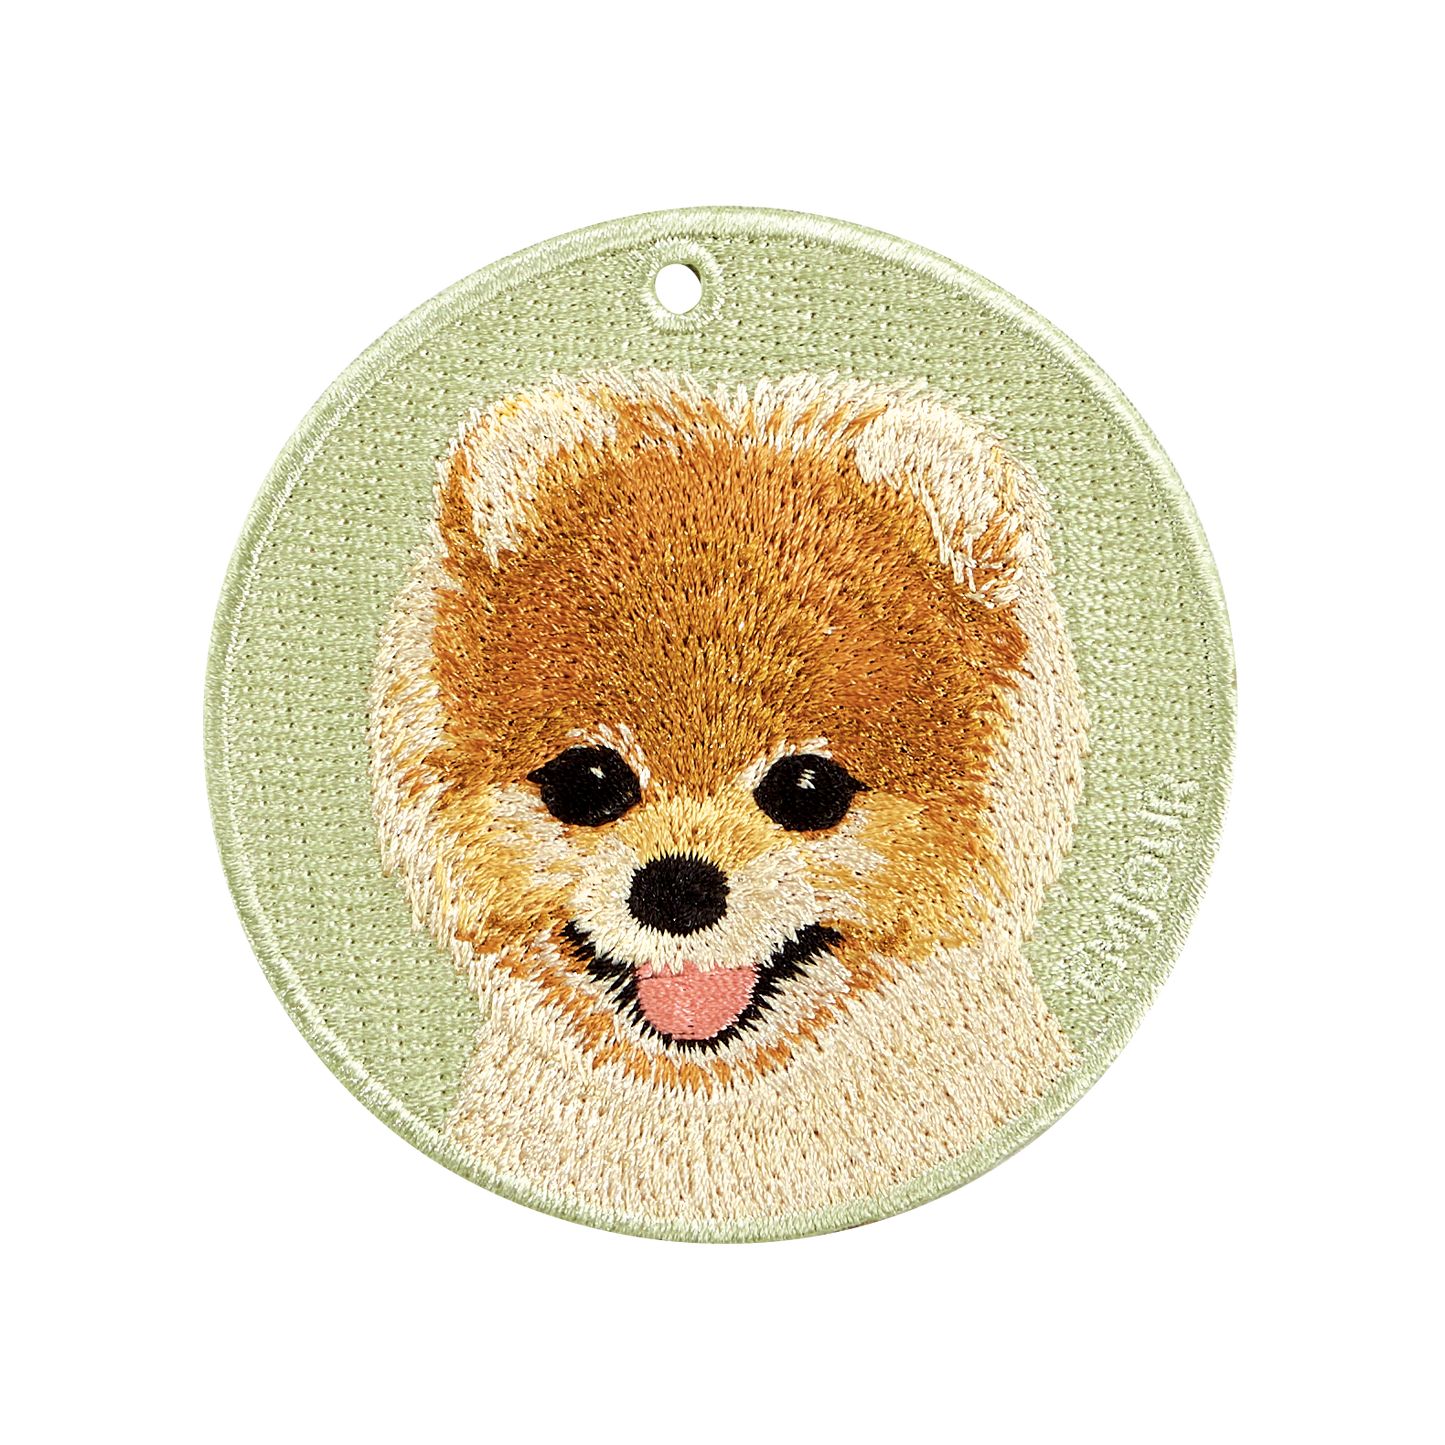 Reversible Embroidery Charm - Brown Bomei